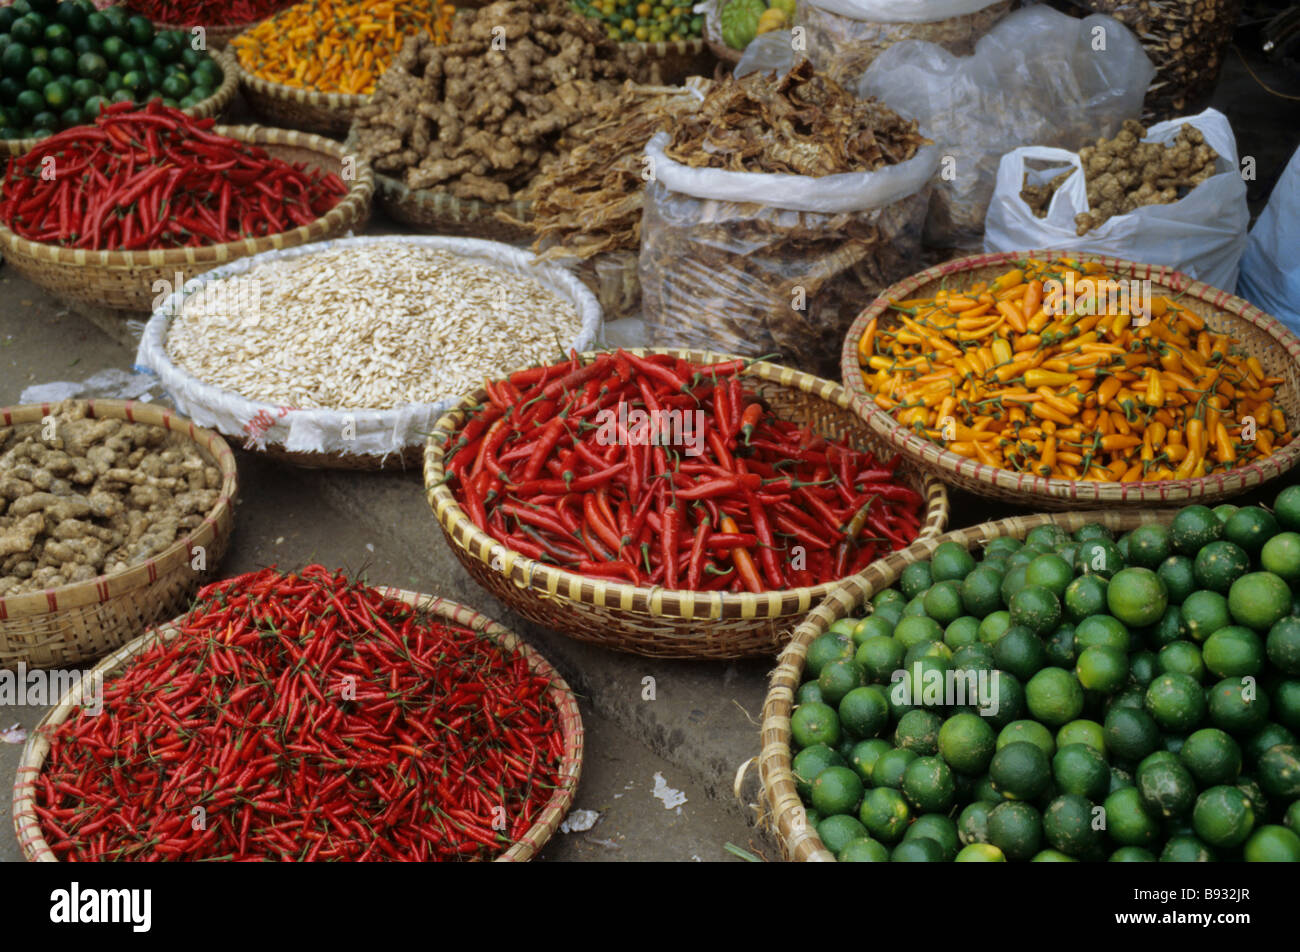 Chillies, spices, limes and ginger, market Hanoi Vietnam Stock Photo